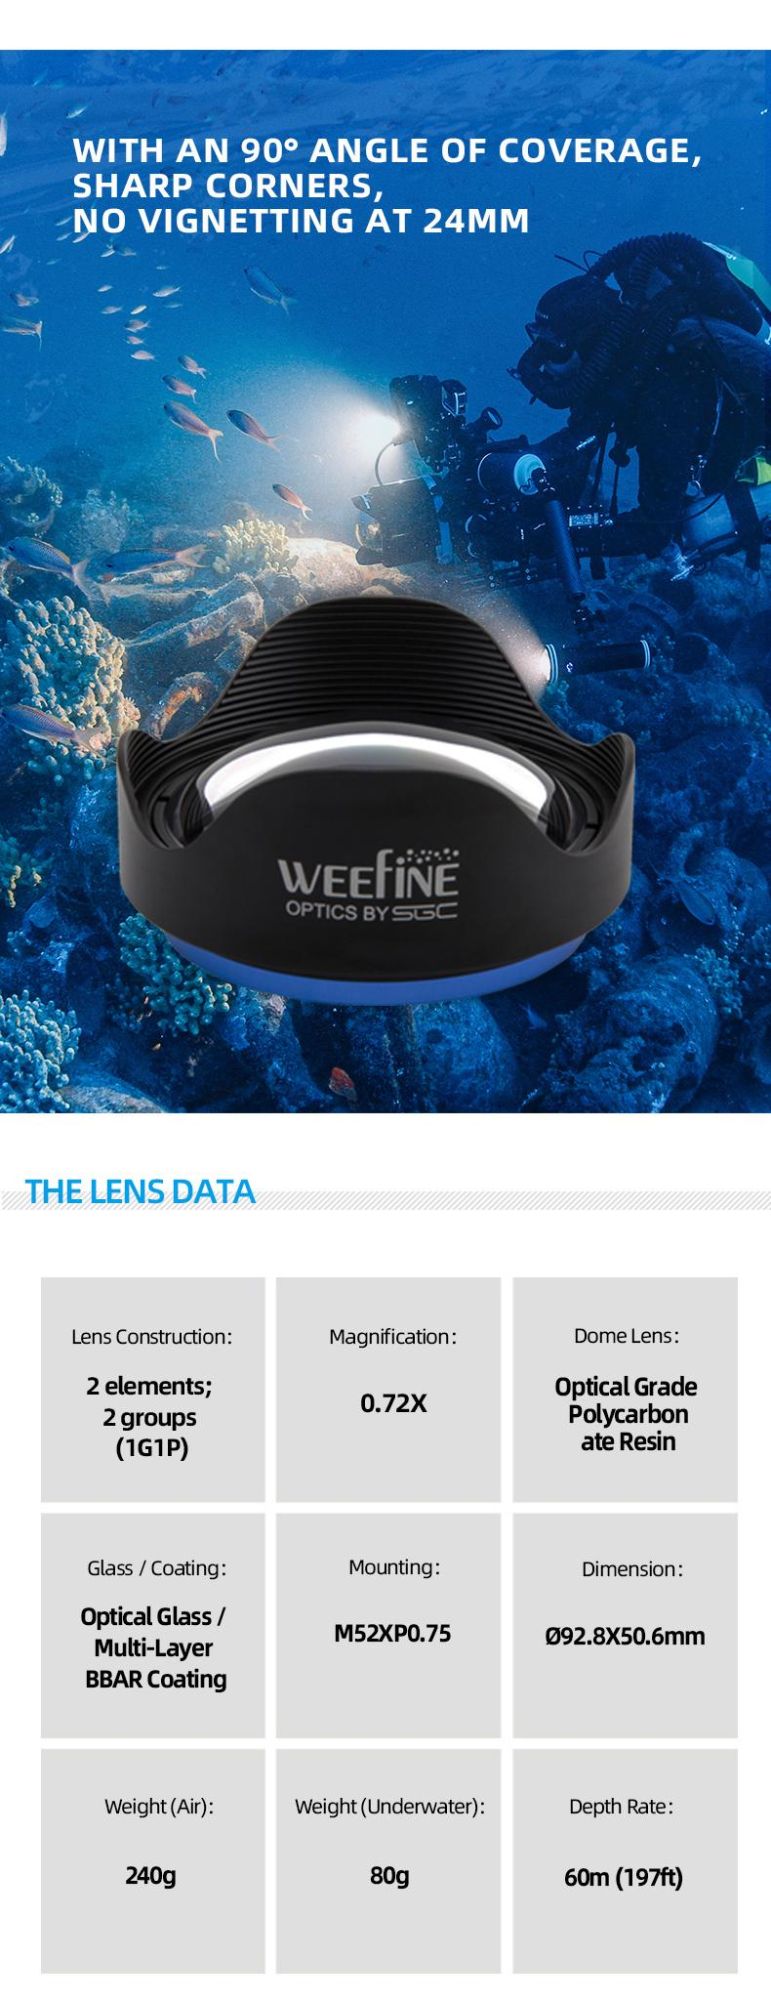 Weefine M52 Standard Wide Angle Lens with an 90 Degree Angle of Coverage Anamorphic Lens Camera Lens